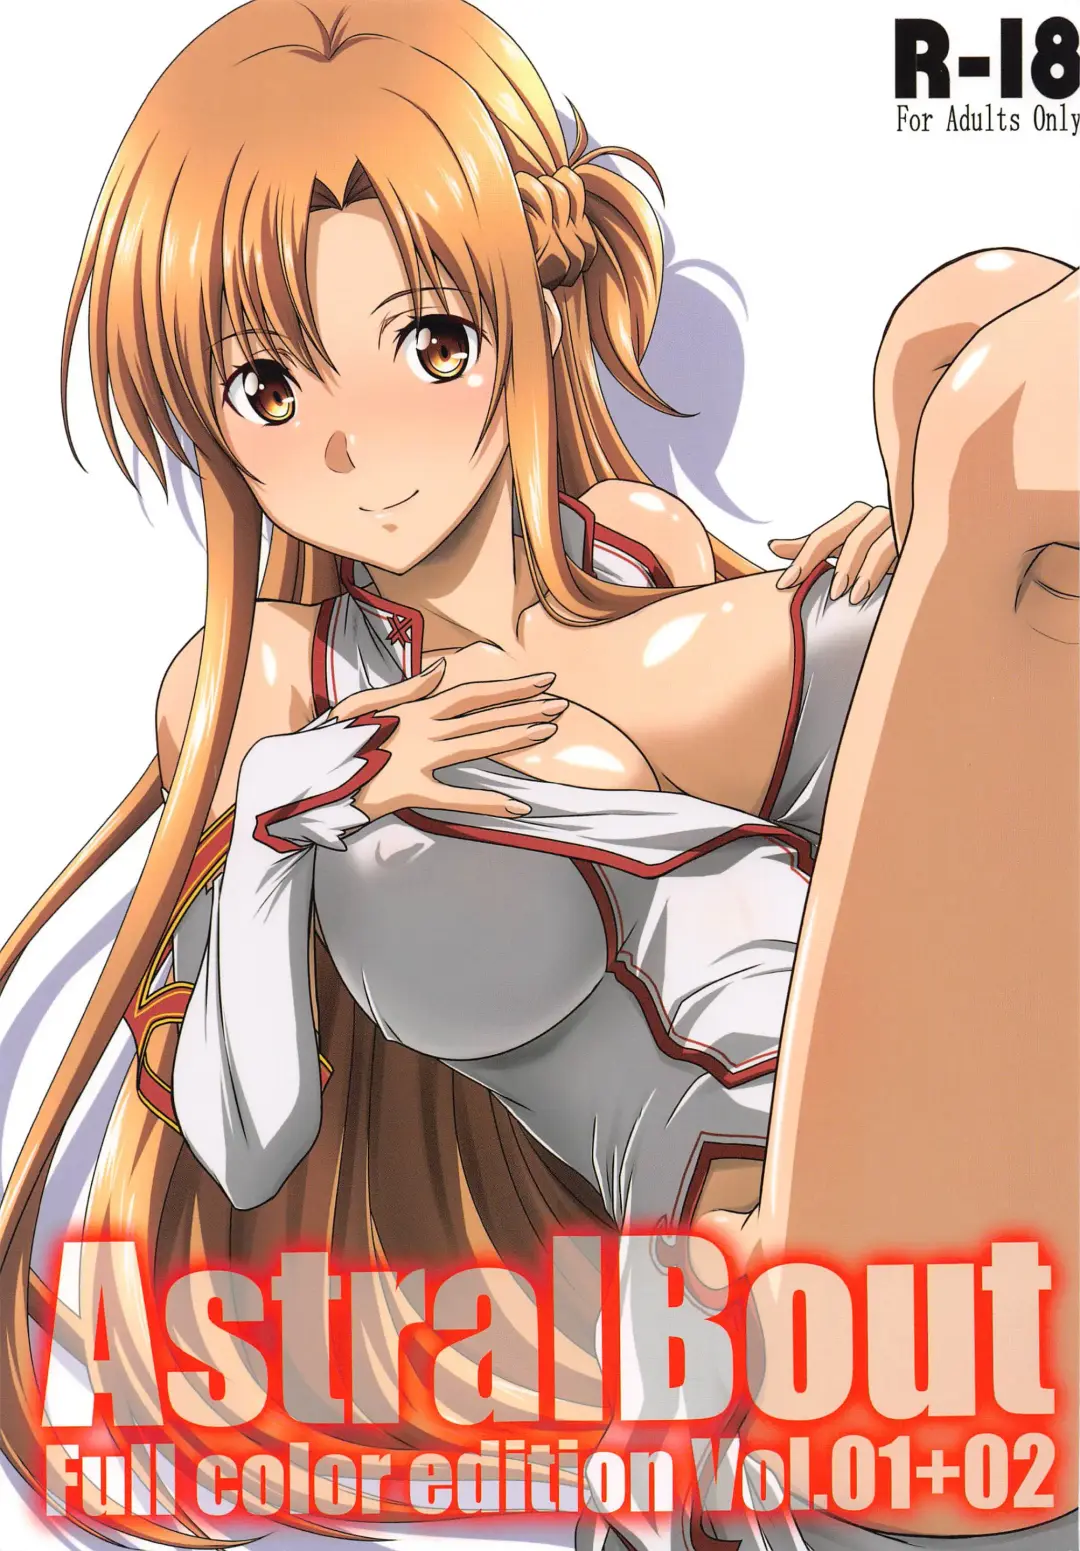 Read [Mutou Keiji] Astral Bout Full Color edition Vol. 01+02 - Fhentai.net